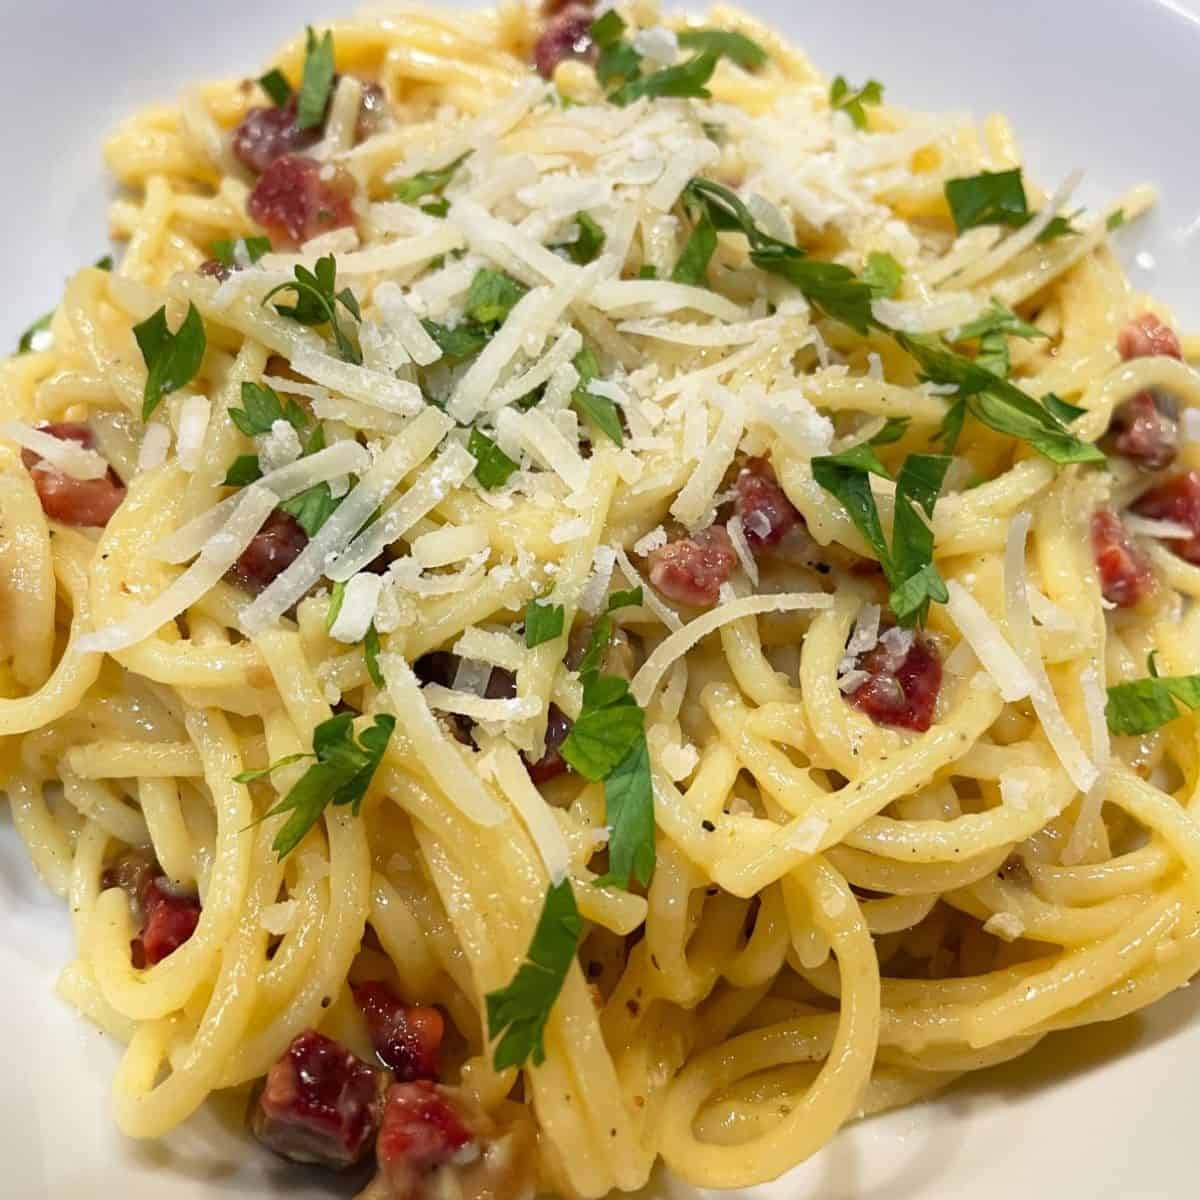 spaghetti carbonara in a white bowl garnished with chopped parsley and shredded romano cheese